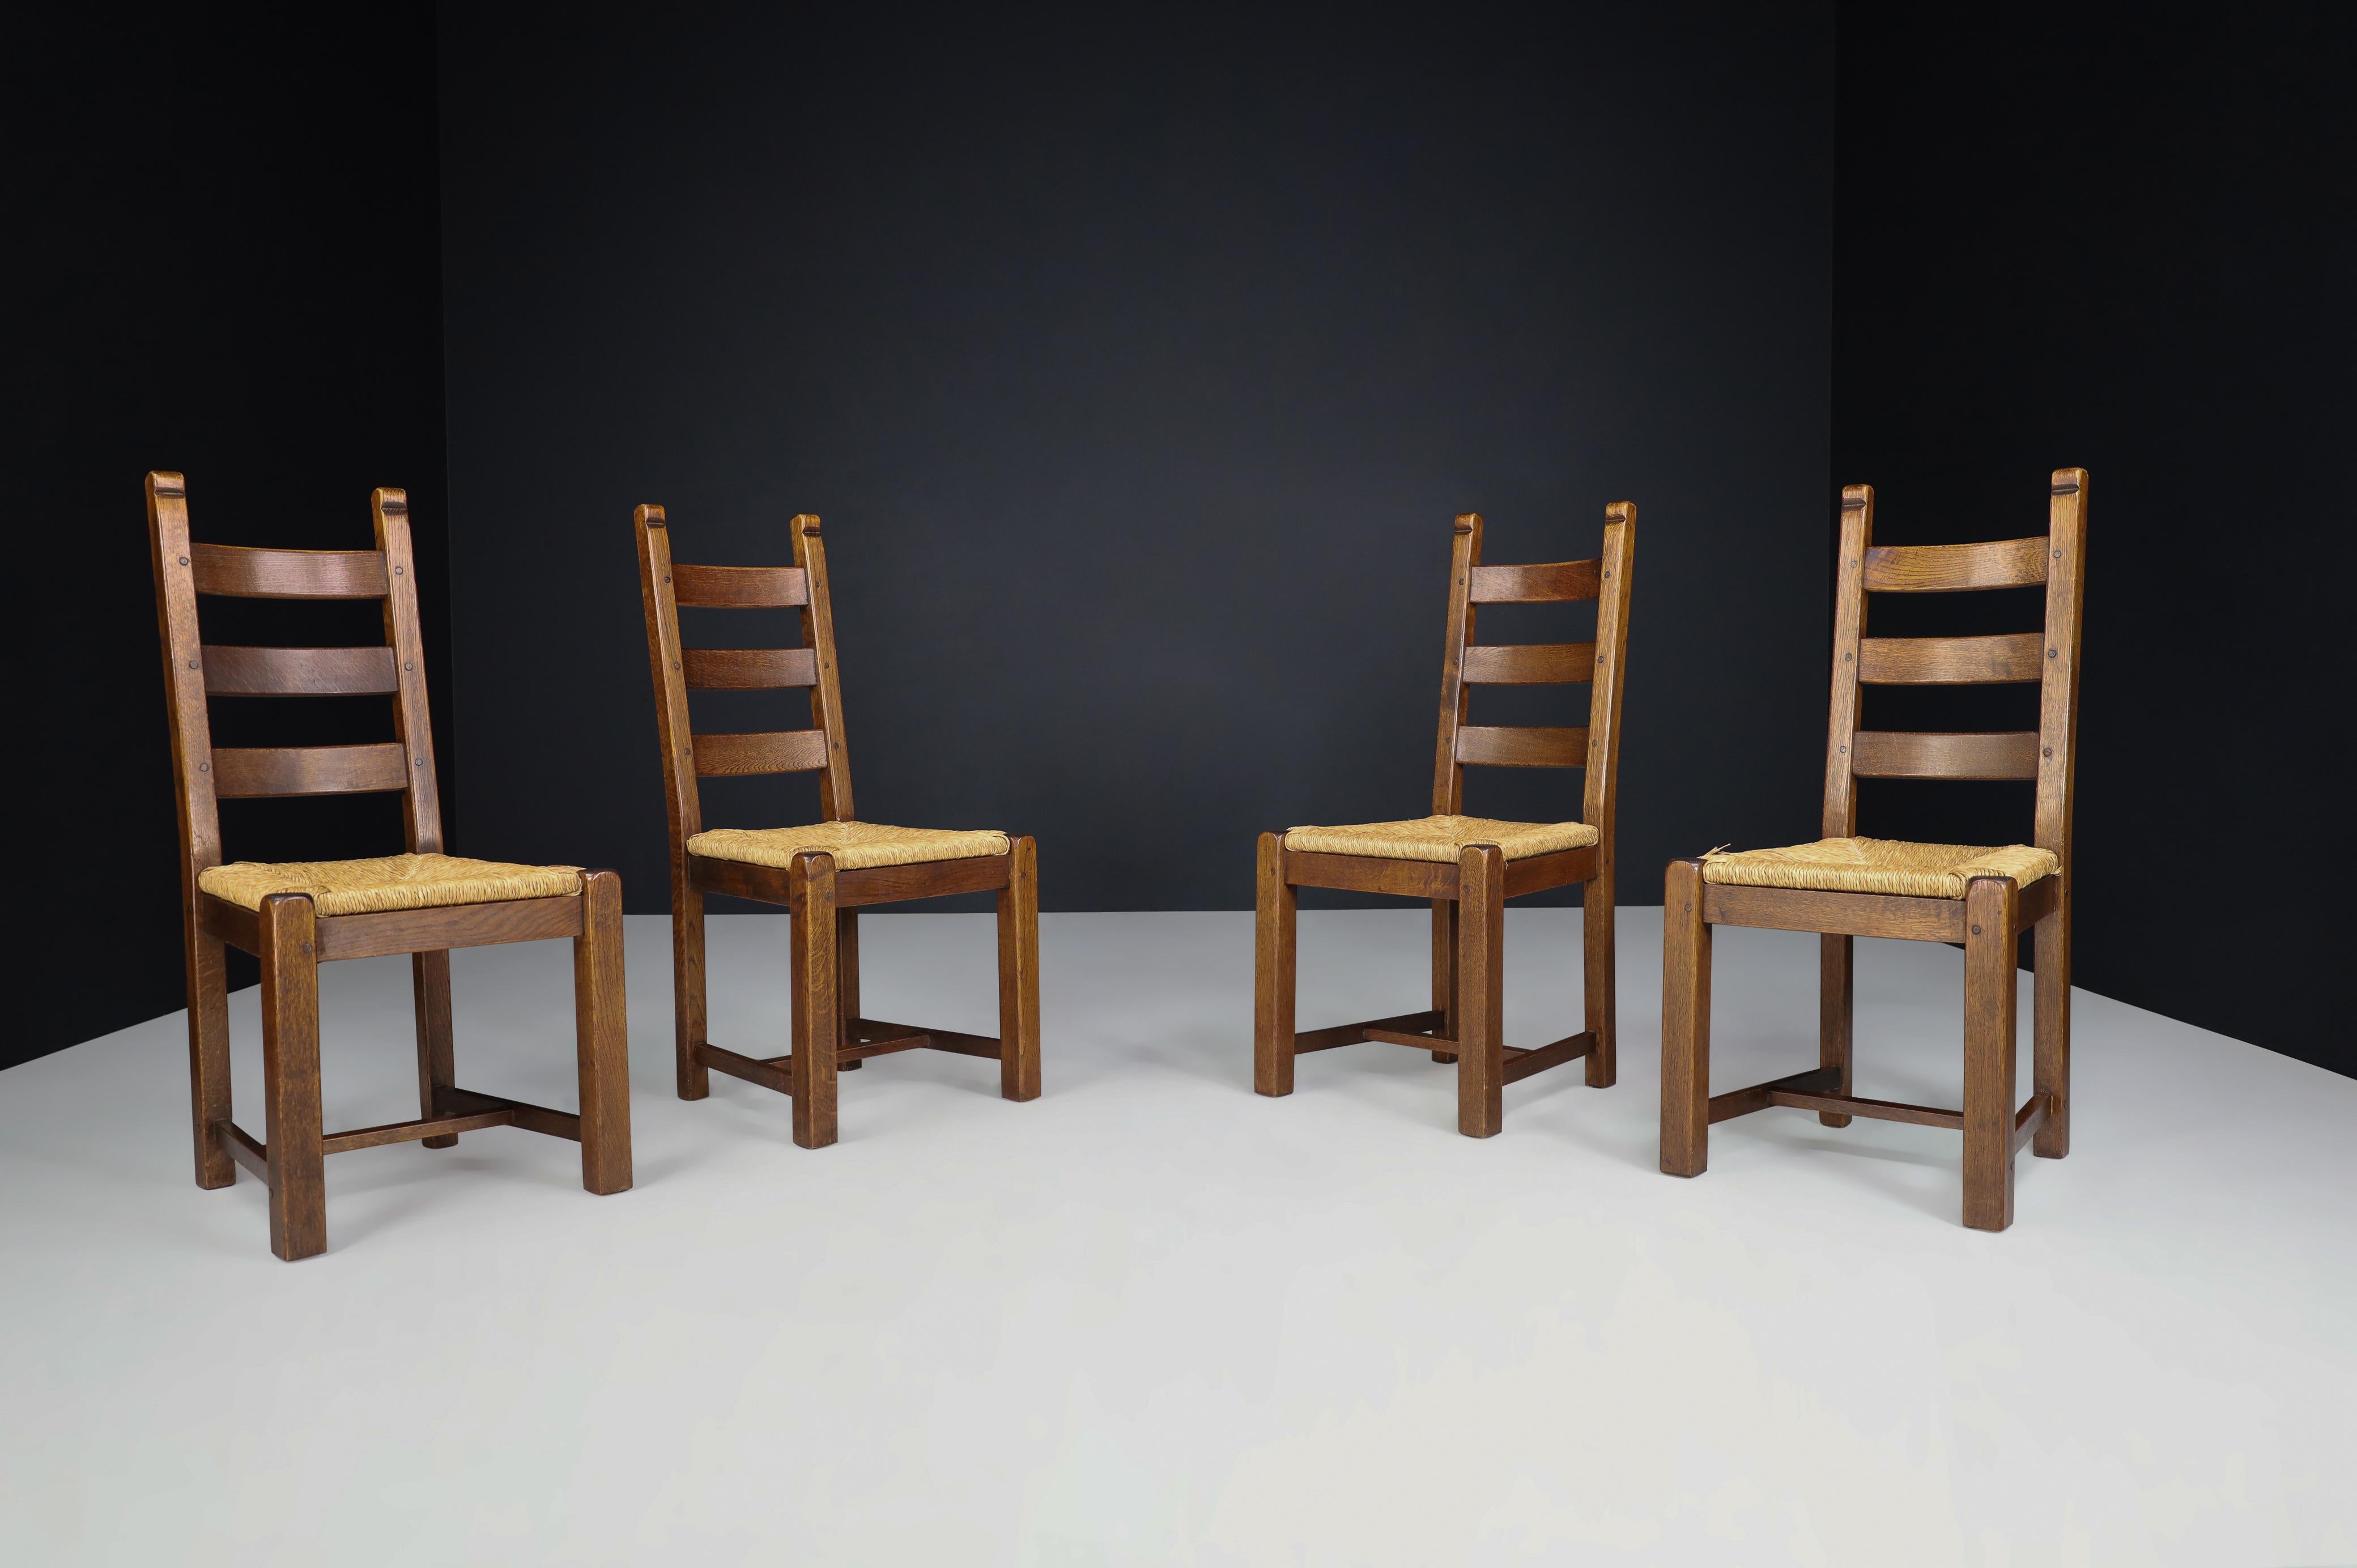 Oak and Rush Rustic Dining Chairs, France, 1960s.

These solid dining chairs made from rustic oak and rush in France during the 1960s are an absolute must-have! The set includes four chairs that are in excellent condition, boasting a warm wood